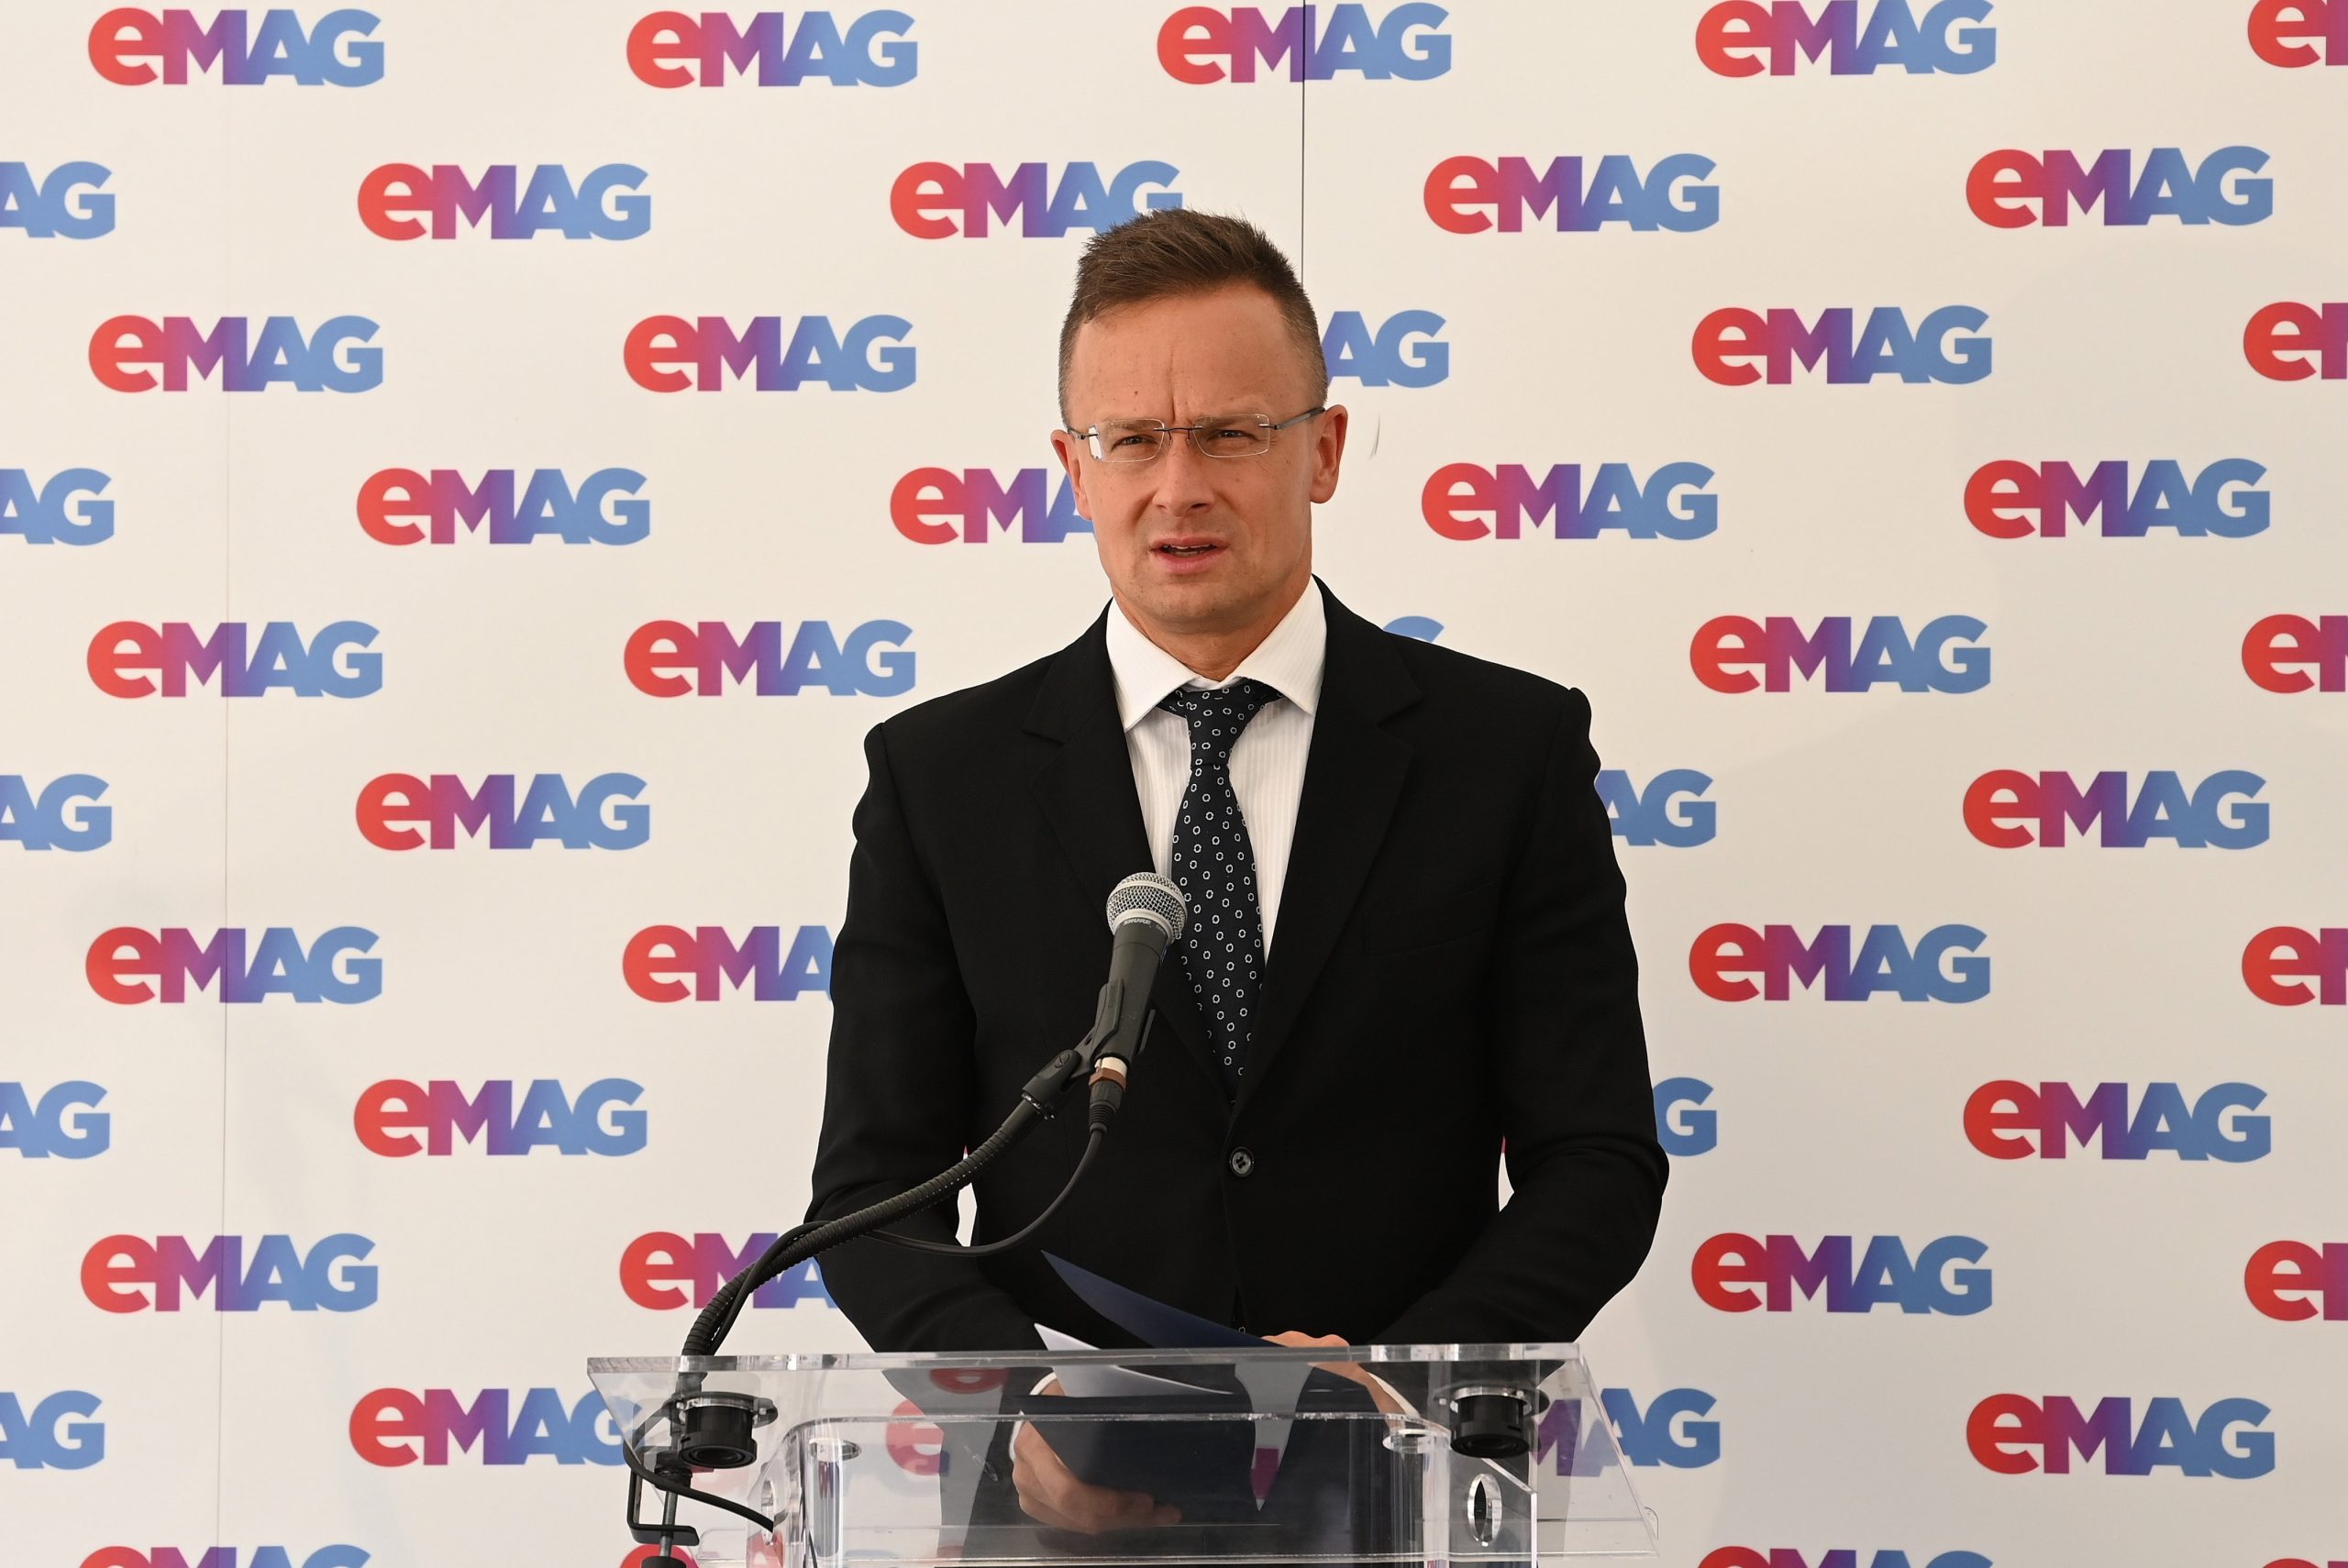 EMAG to Carry Out Huge Warehouse Investment in Hungary